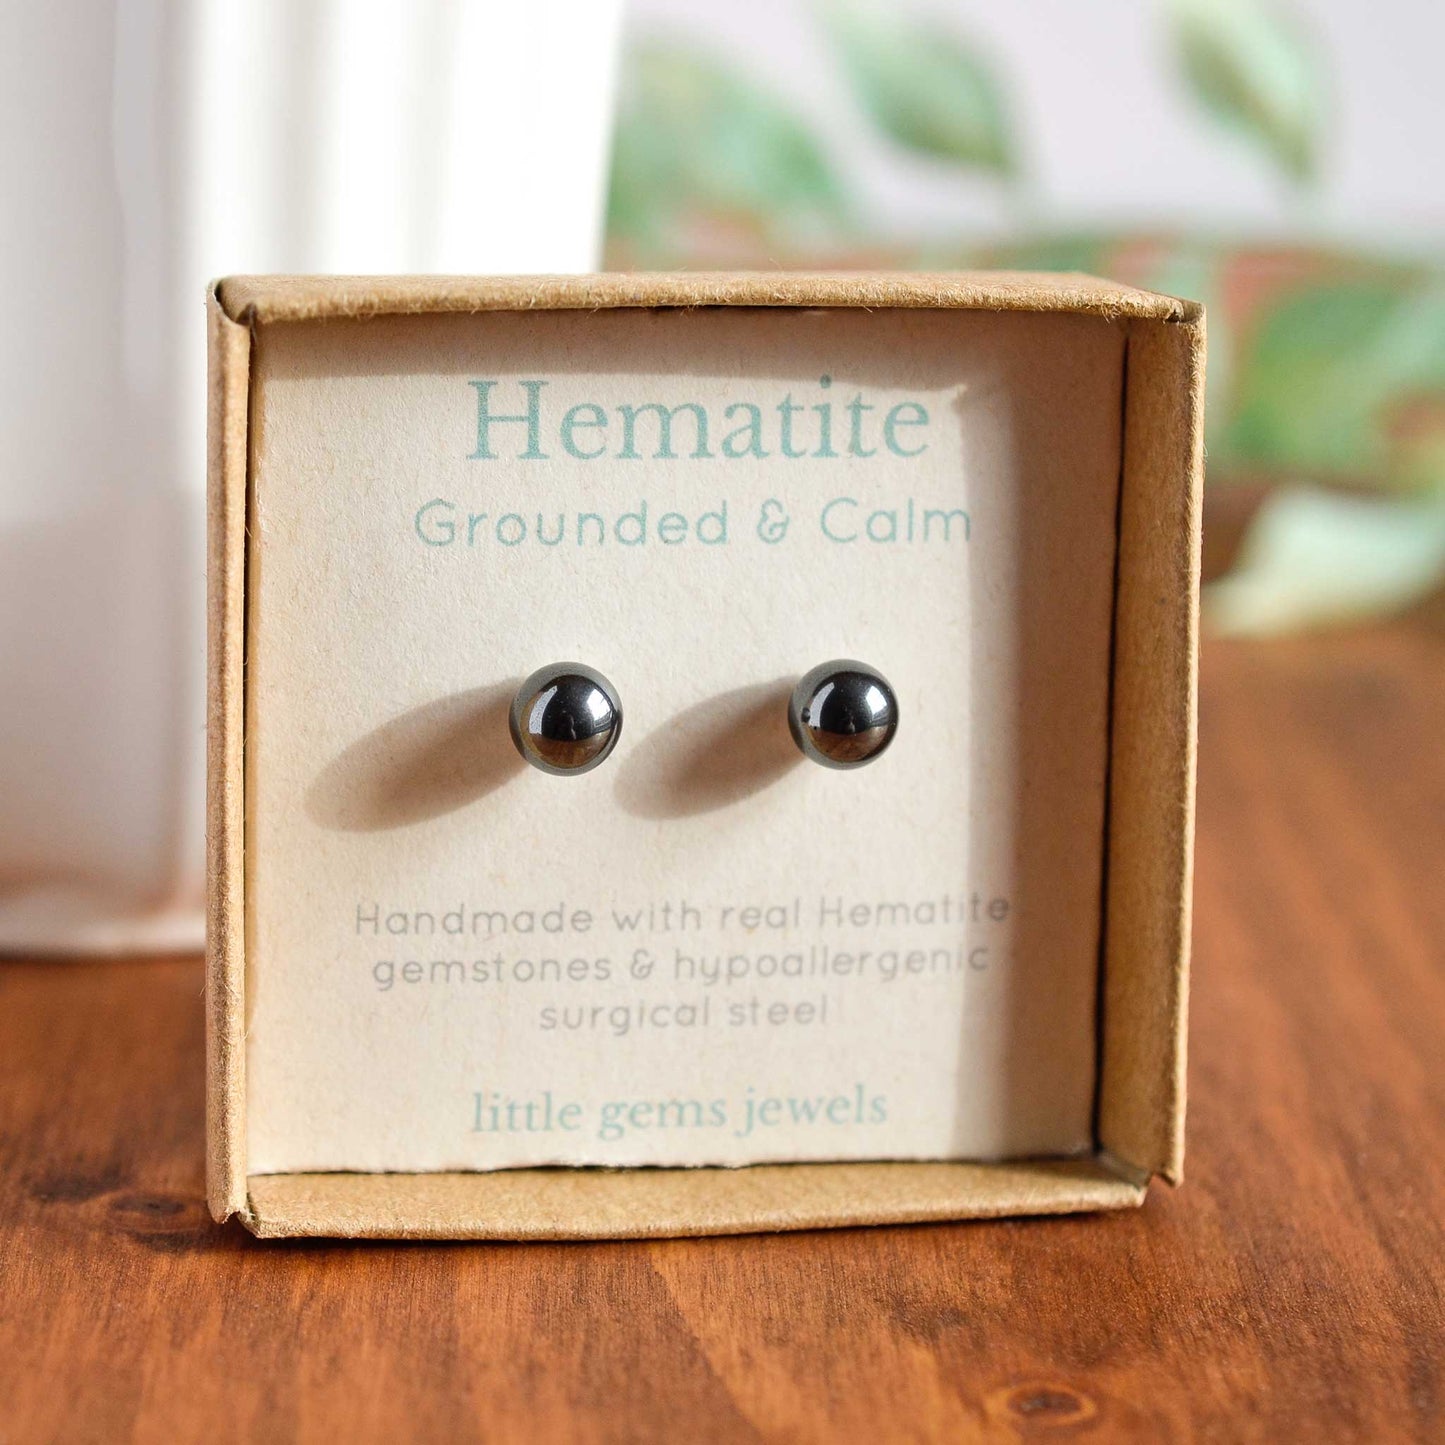 Hematite for grounding and calm gemstone stud earrings in eco friendly gift box